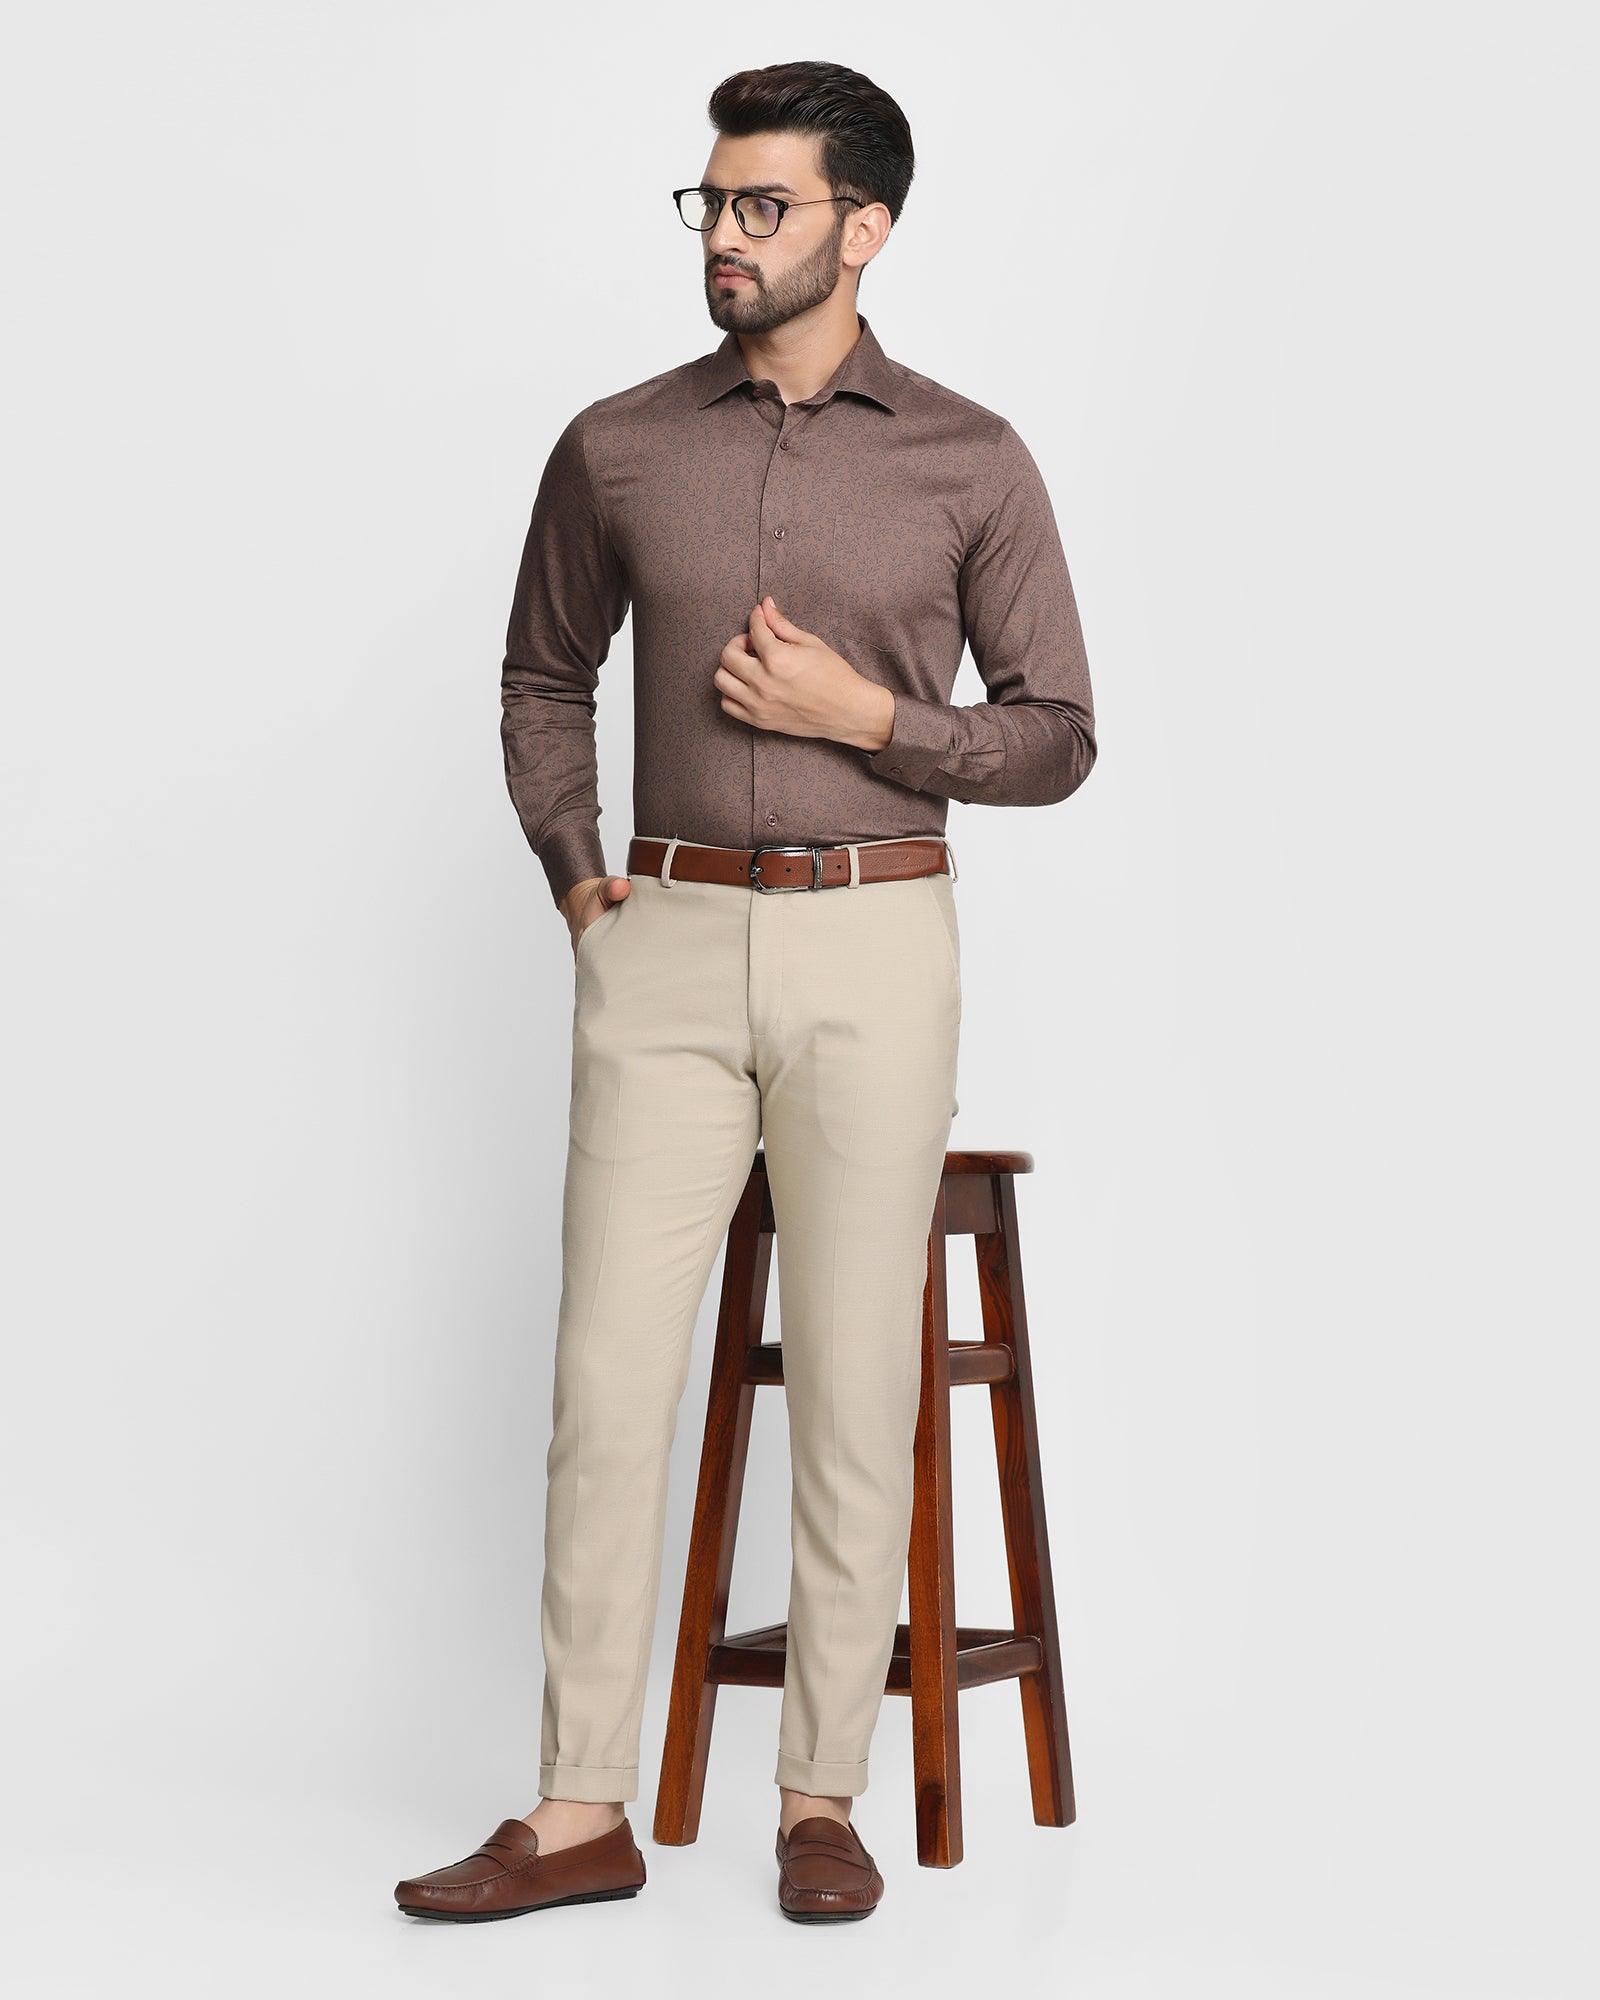 Mix and Match Brown Shirt Black Pants Outfit Ideas for Men